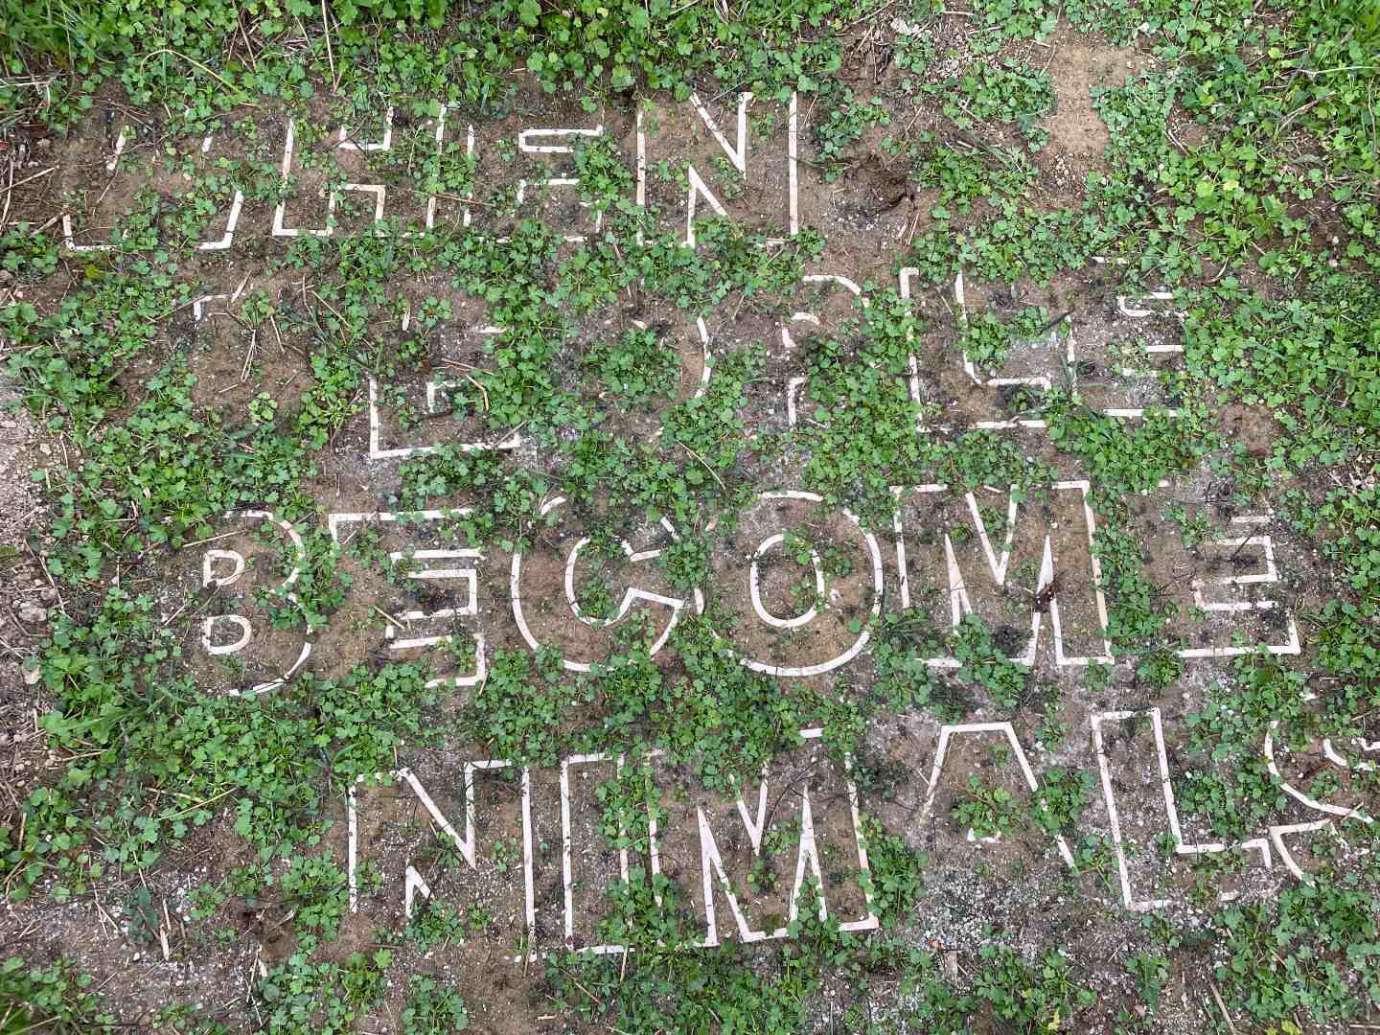 The words "When People Become Animals" are buried in the ground with only the outline visible. Dirt and plants surround the words and fill the letters.